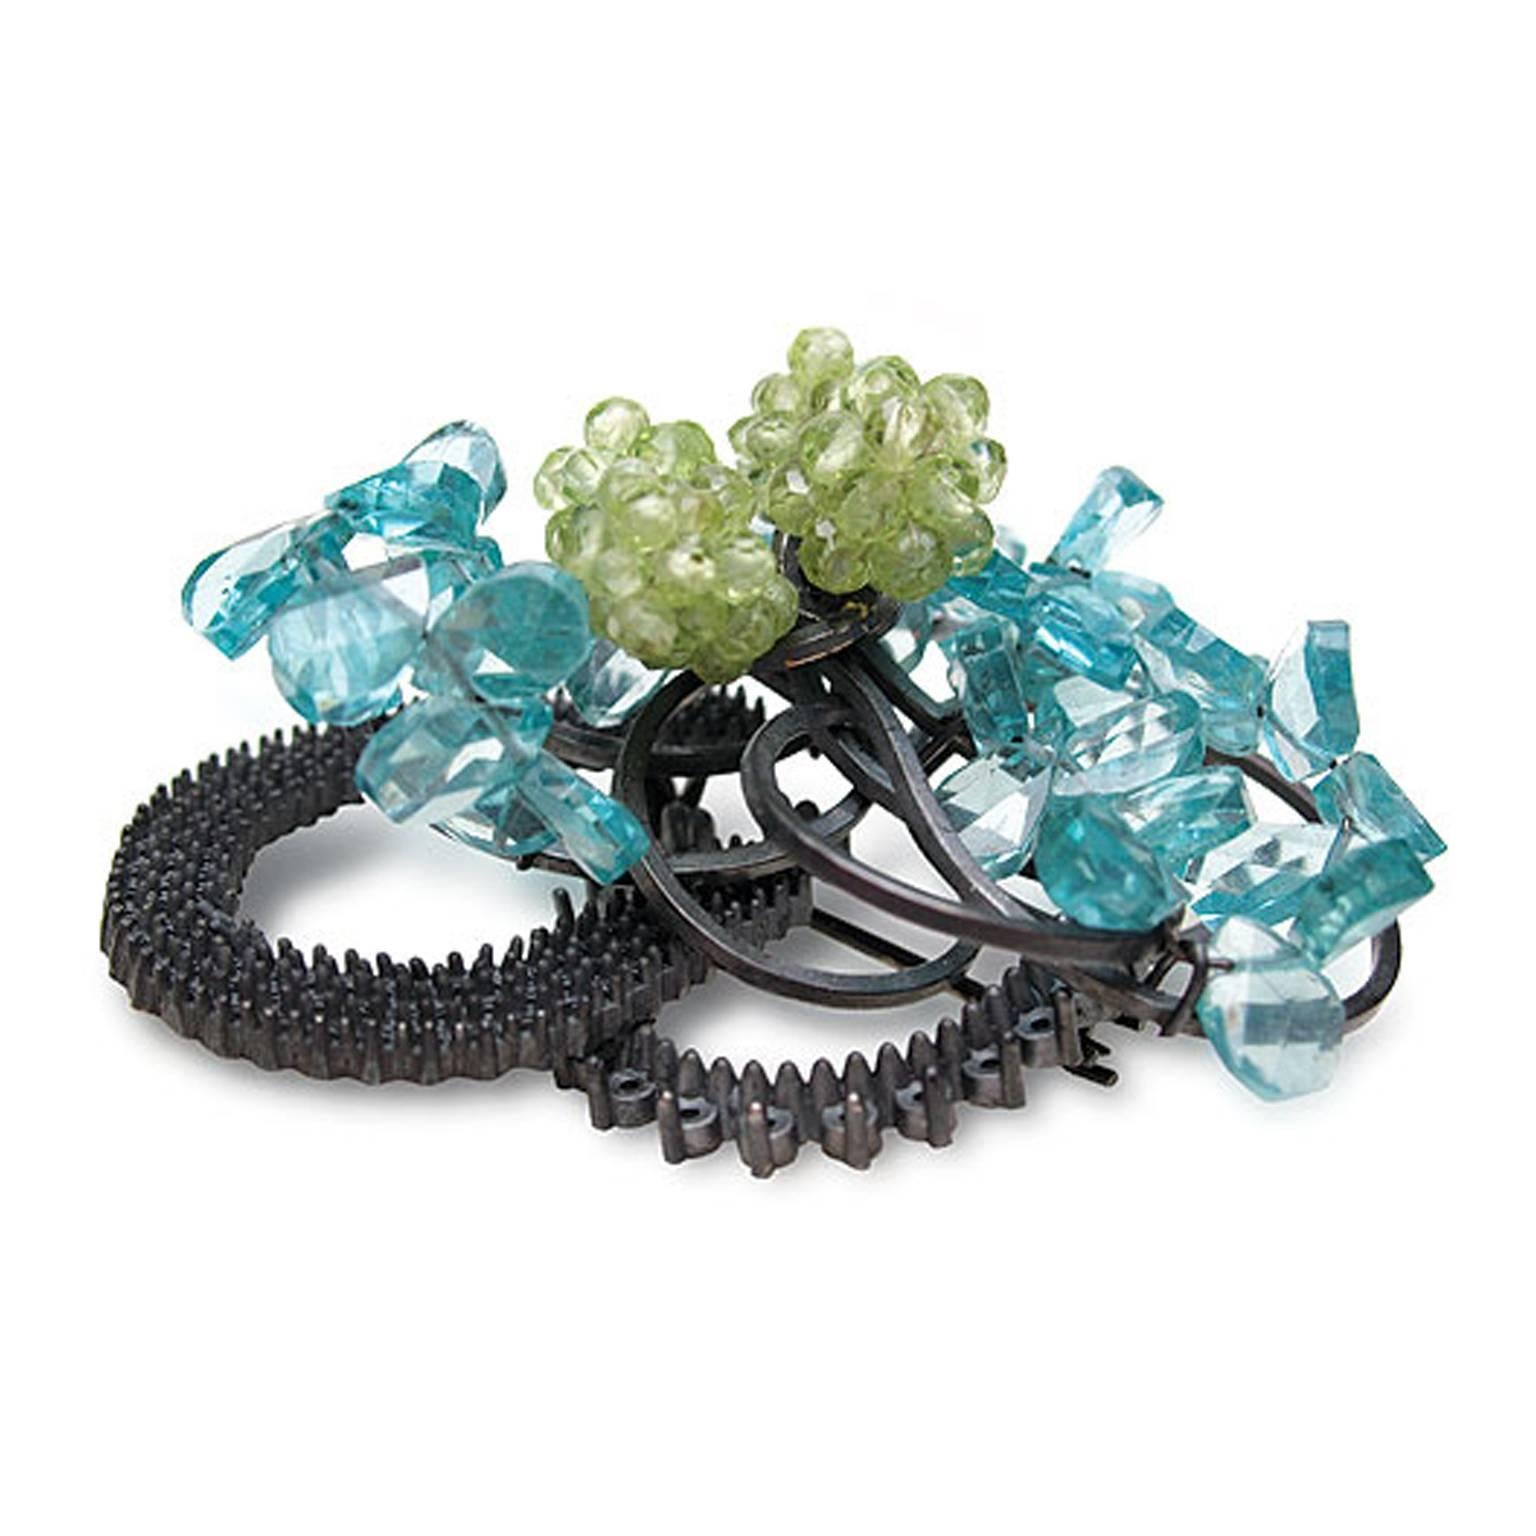 Sculptural clusters of Peridot and Apatite are set against a backdrop of entwined blackened sterling silver. This beguiling brooch is hand-crafted in her London studio by Donna Brennan.

Donna's work typically features jewellery & sculpturally